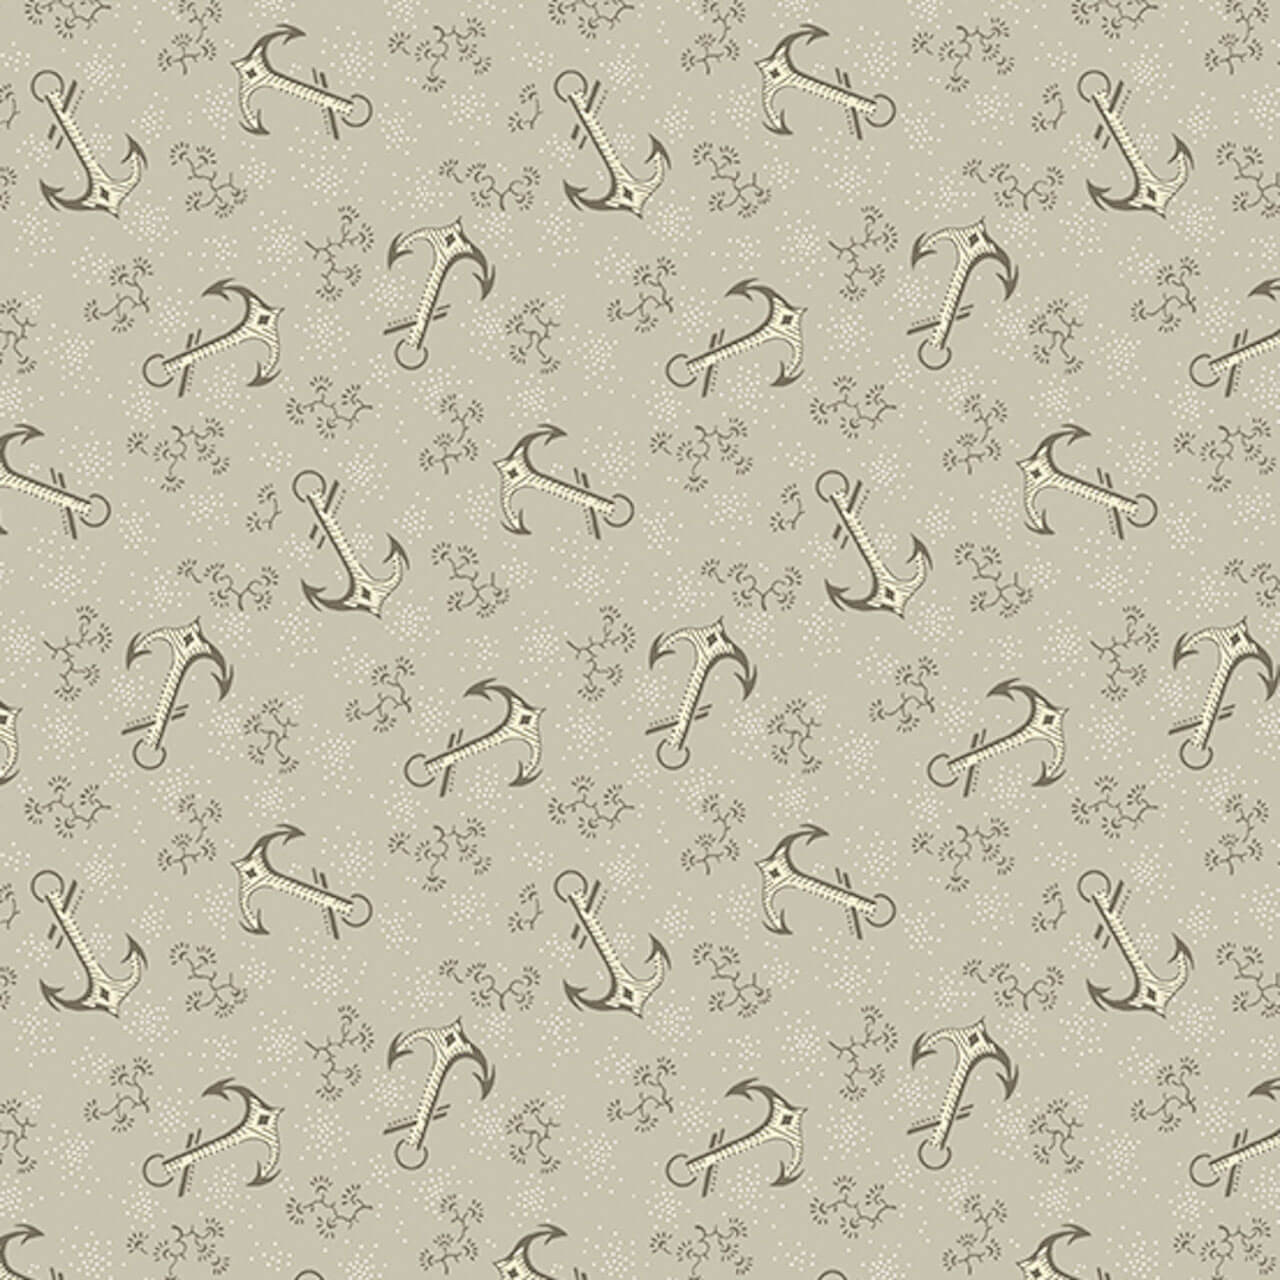 "Anchors in Oyster" fabric from Andover's Tradewinds collection by Renee Nanneman, featuring elegant anchor patterns on a cream cotton background.